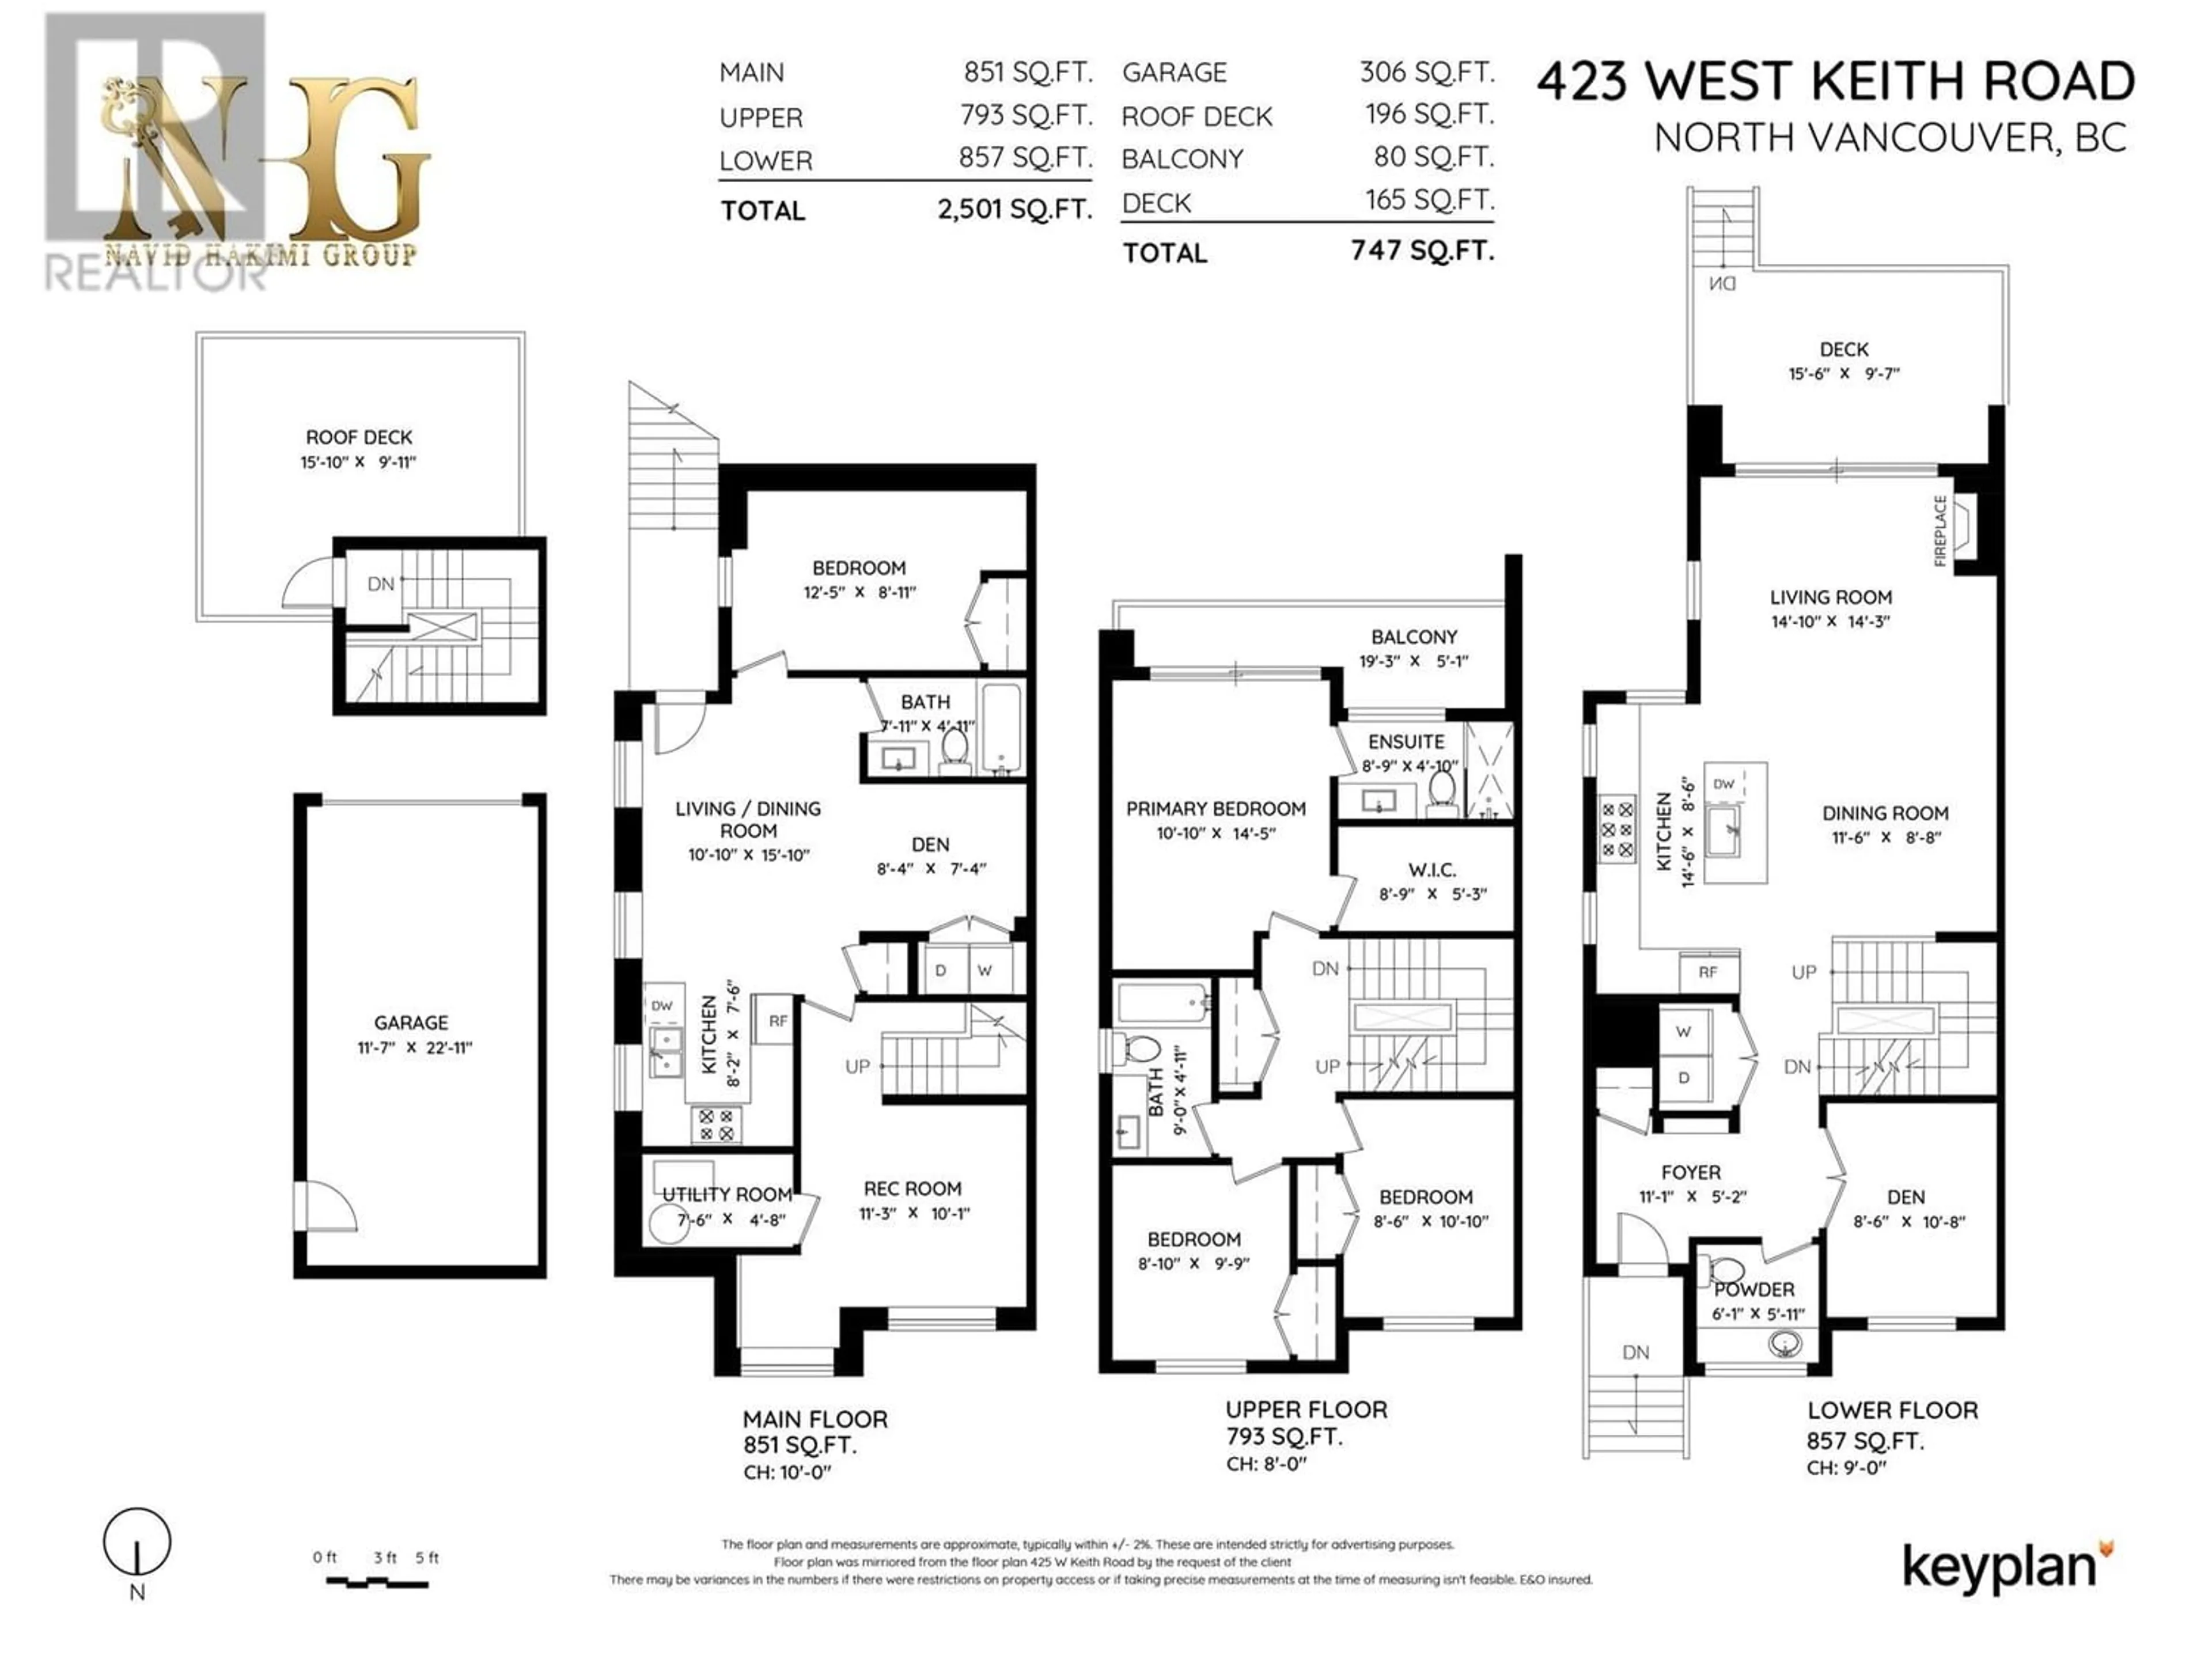 Floor plan for 423 W KEITH ROAD, North Vancouver British Columbia V7M1M2